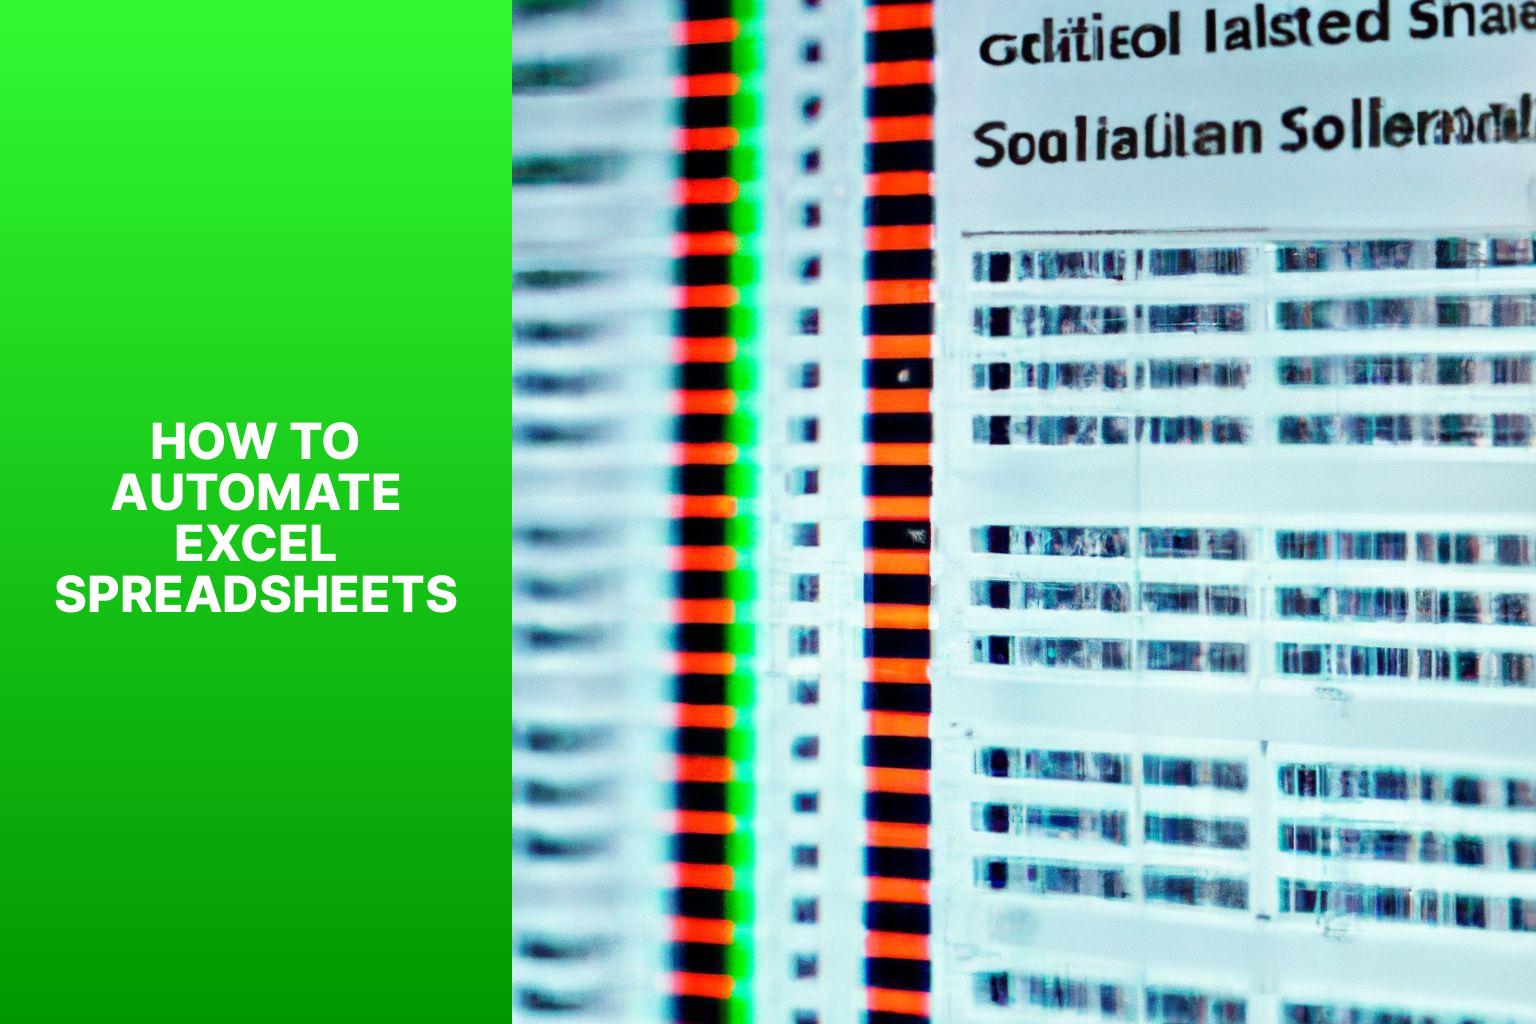 How to Automate Excel Spreadsheets - Excel Spreadsheet Automation: The Secret to a More Efficient Business 